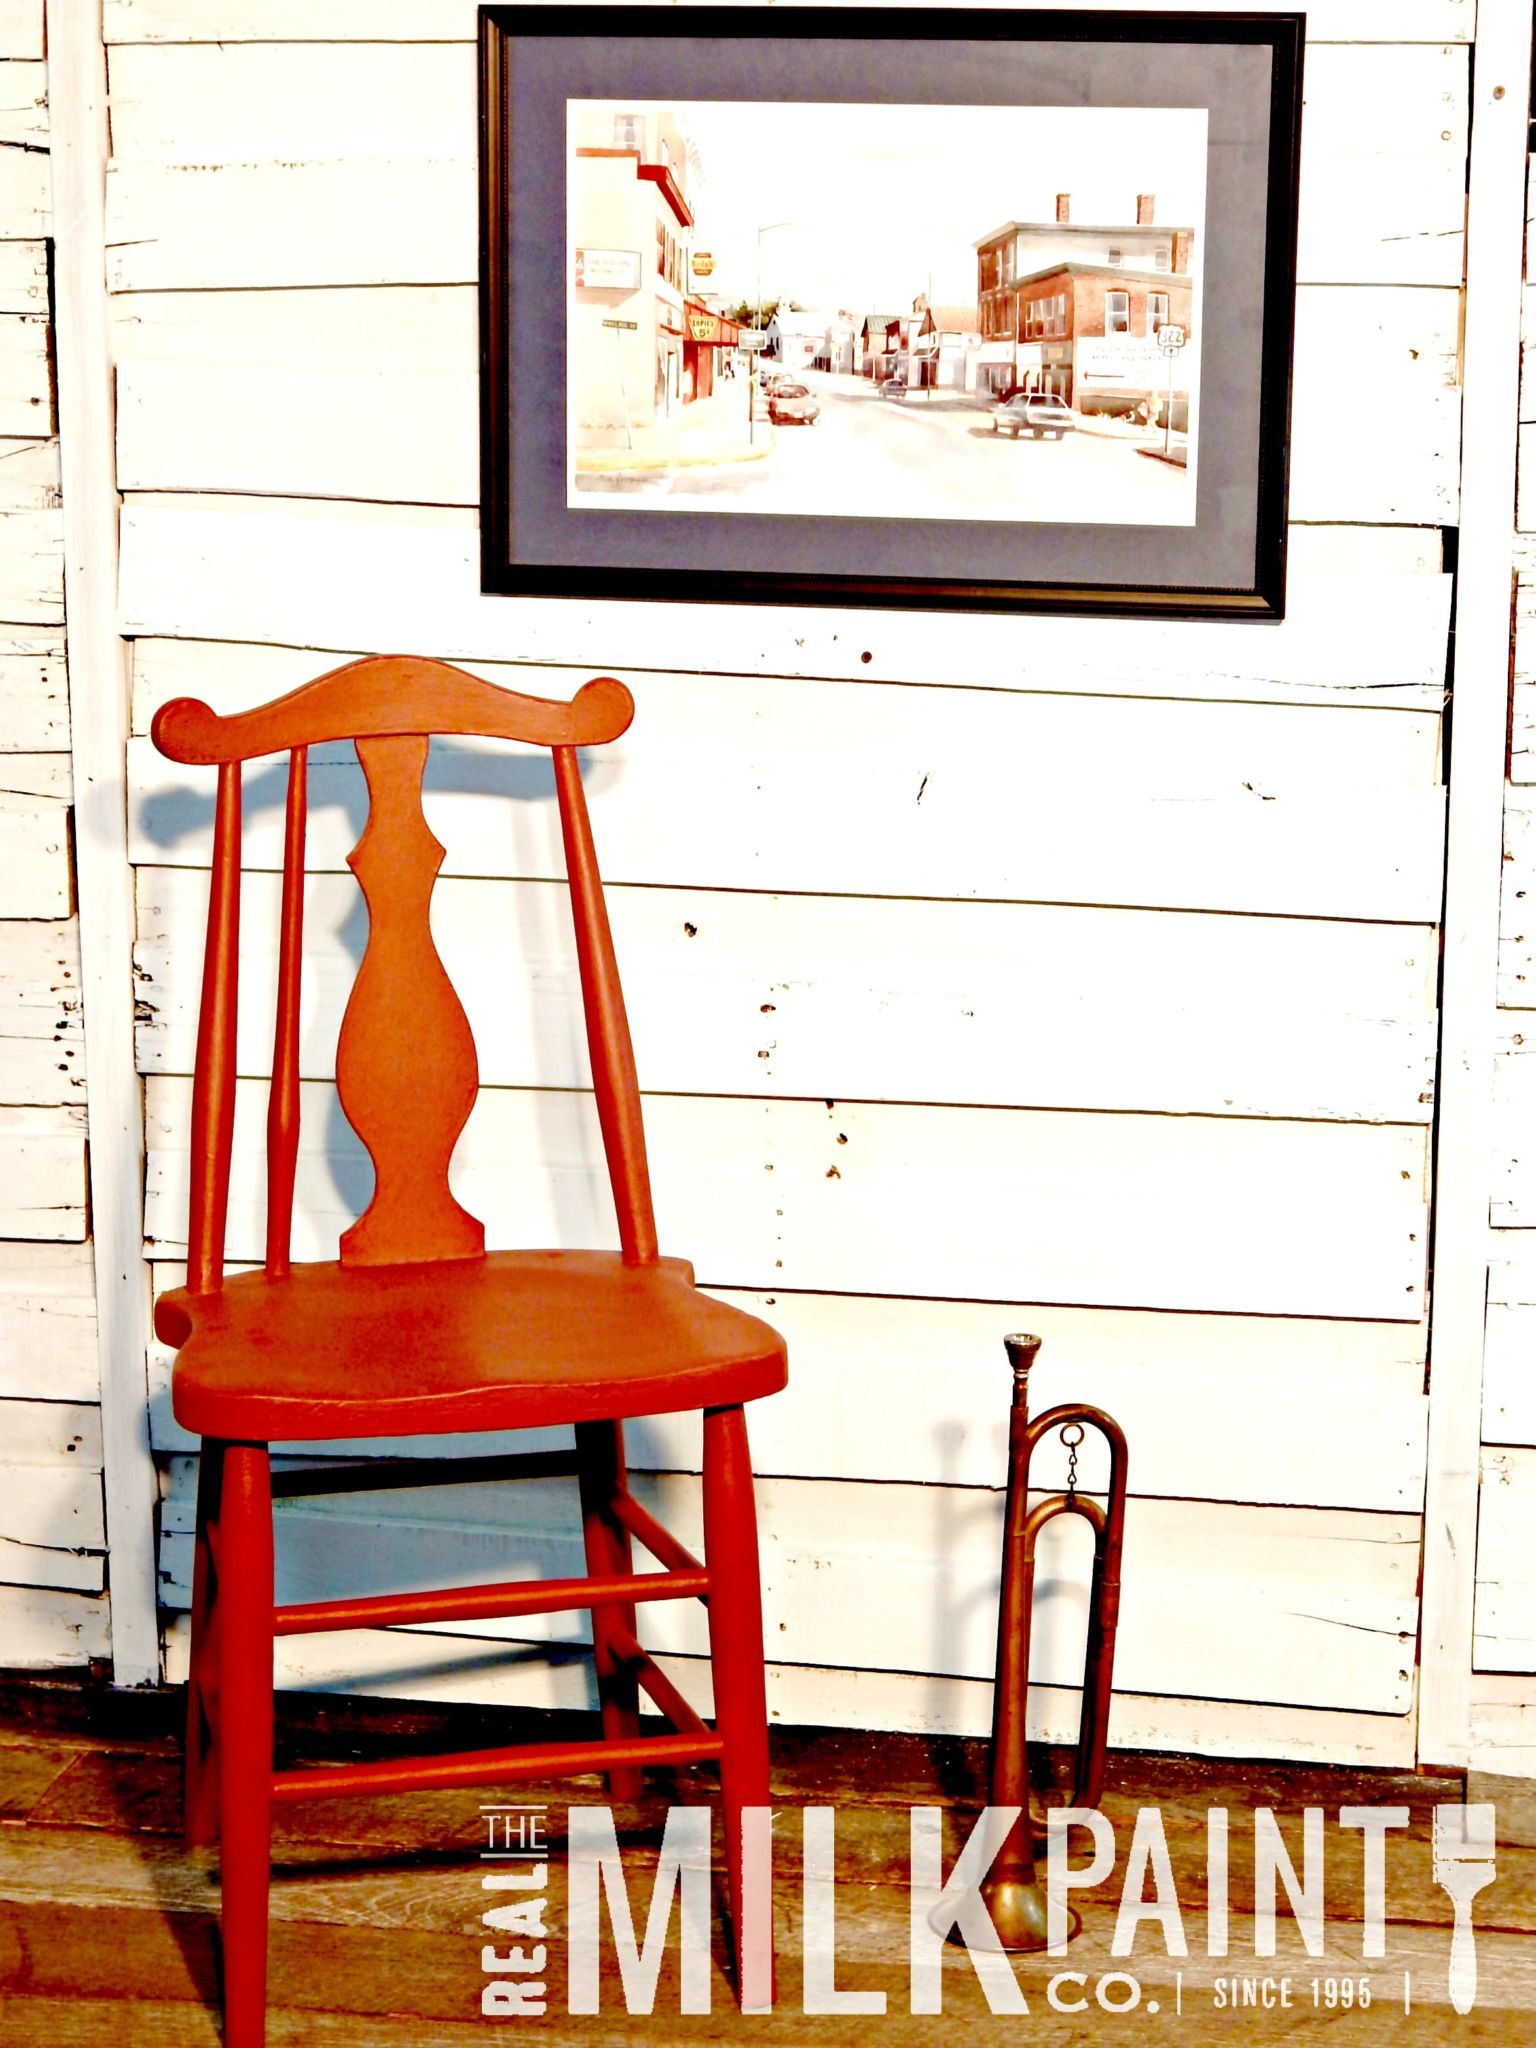 upcycled wood chair using real milk paint products